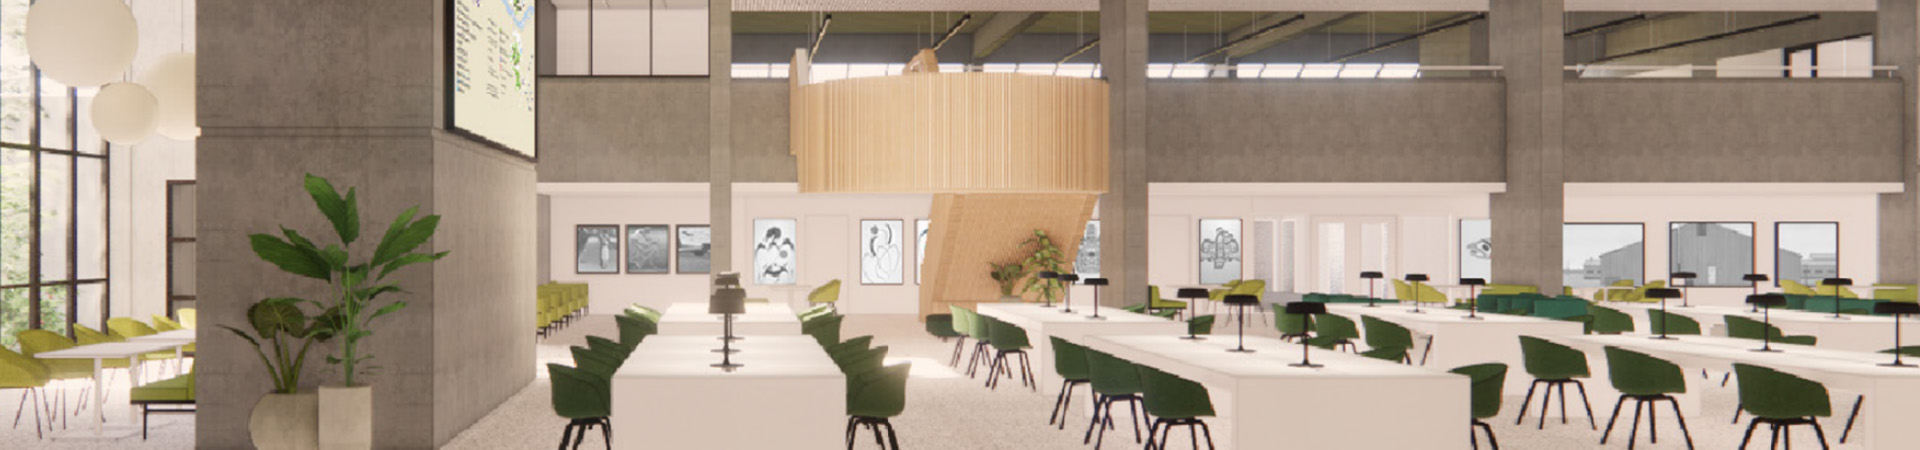 Artist rendering of the learning commons in The D.B. Weldon Library